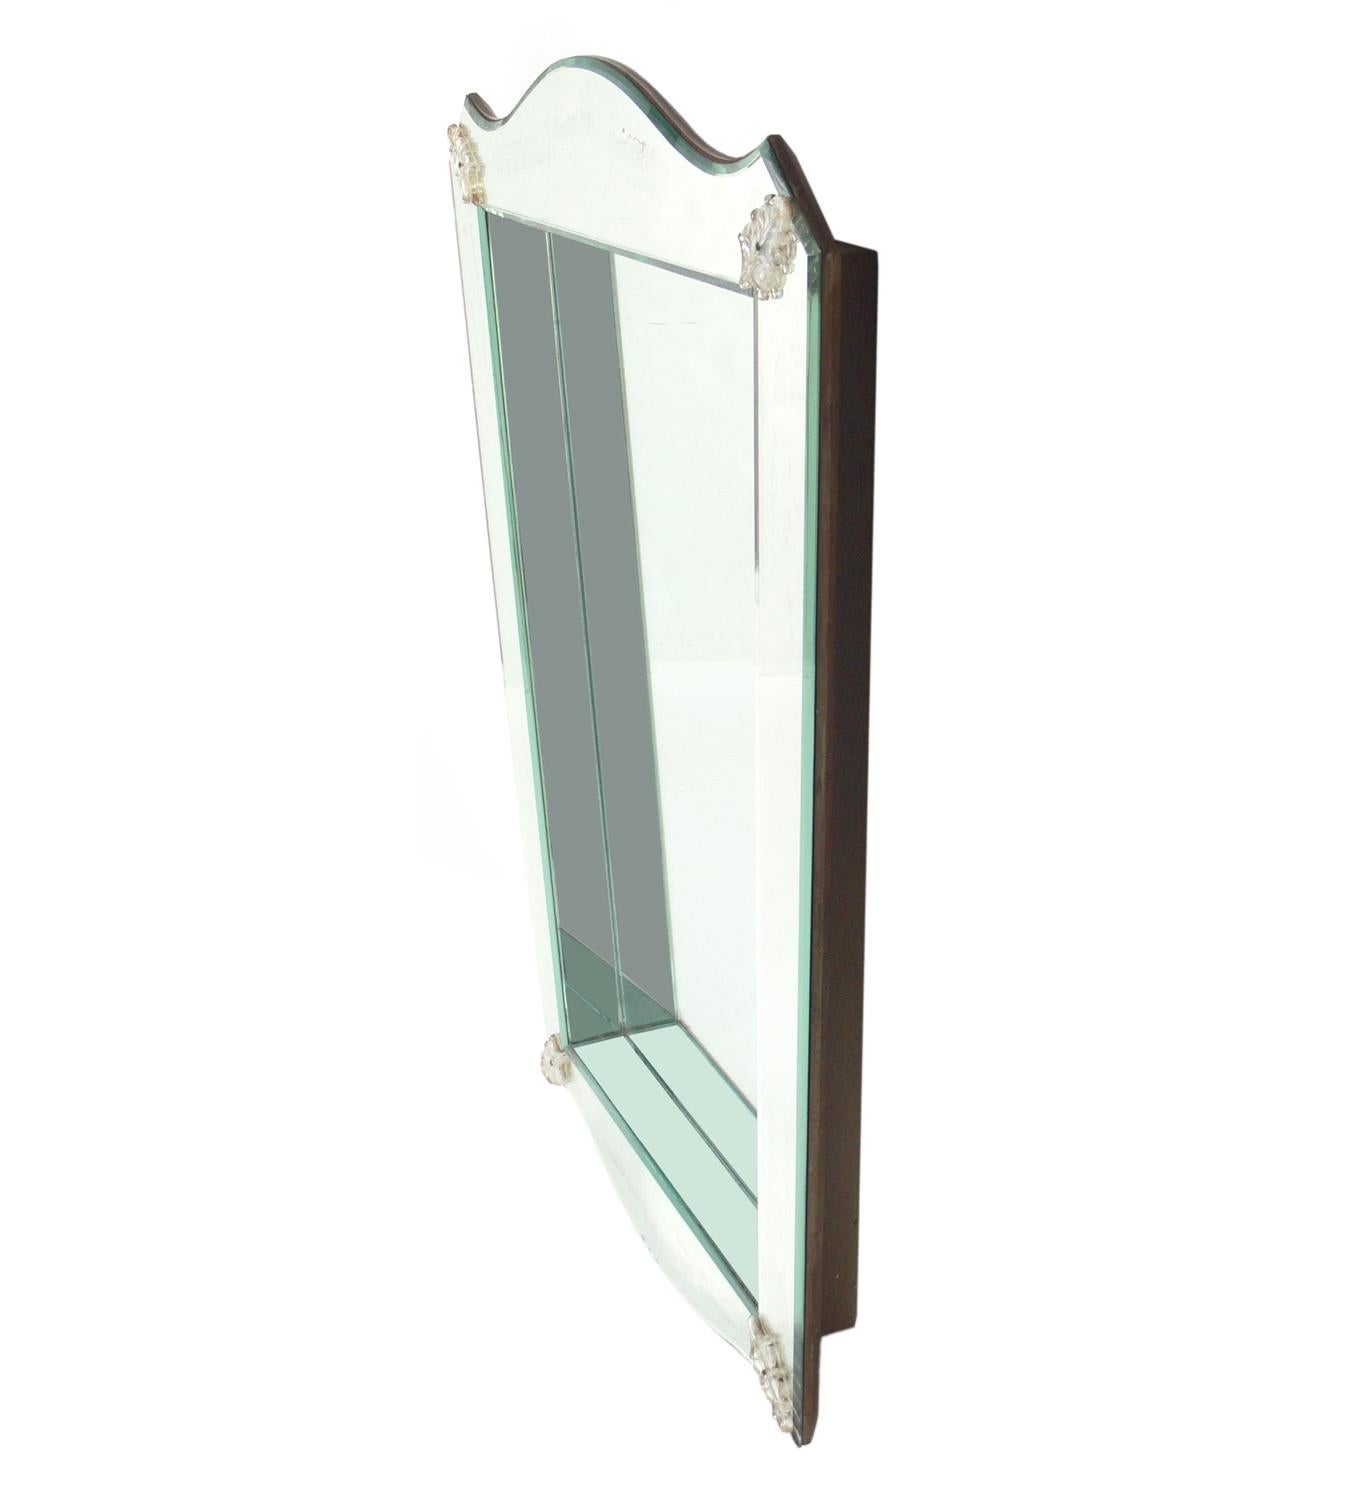 Elegant Venetian shadowbox mirror, Italy, circa 1940s. Glamorous design features an inset shadowbox which allows for display or just adds visual depth. Lucite details at the corners. Retains wonderful original patina.